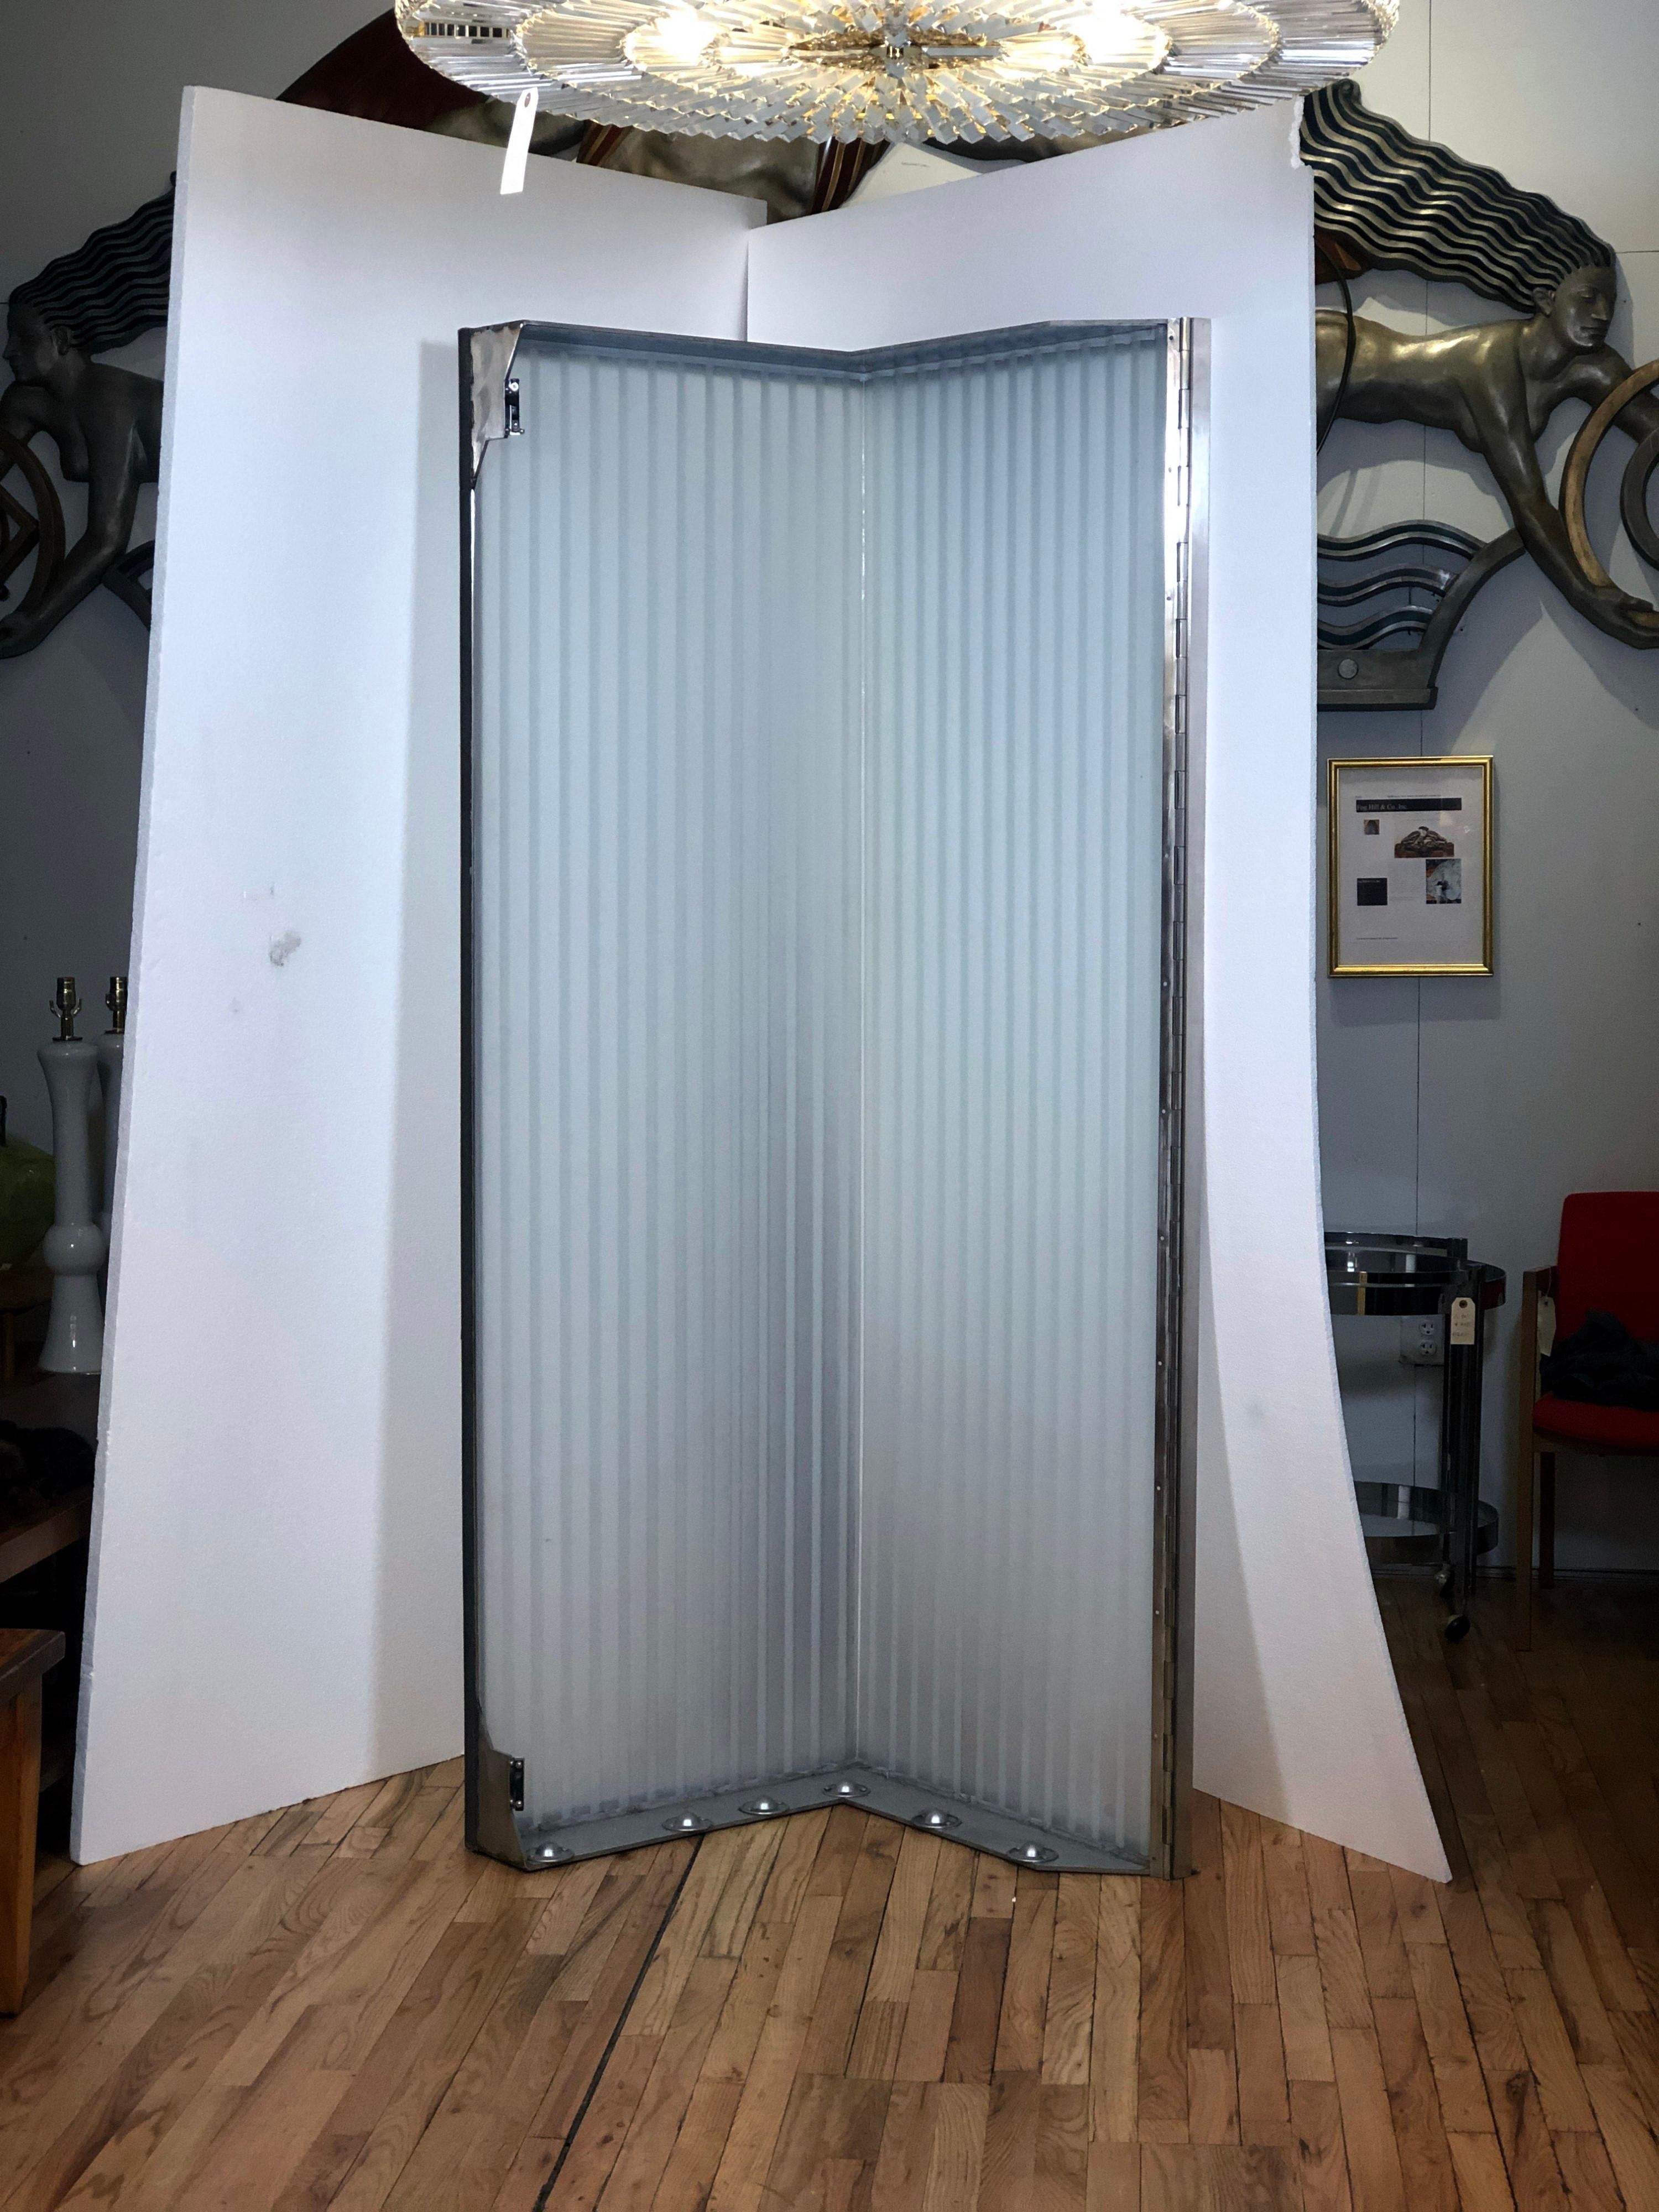 This is part of a 32 foot high lobby light fixture from 1991 in midtown Manhattan. Each unit consists of a large 90 degree brushed stainless steel frame enclosing a translucent corrugated glass piece Each unit sits on ball bearing wheels for easy